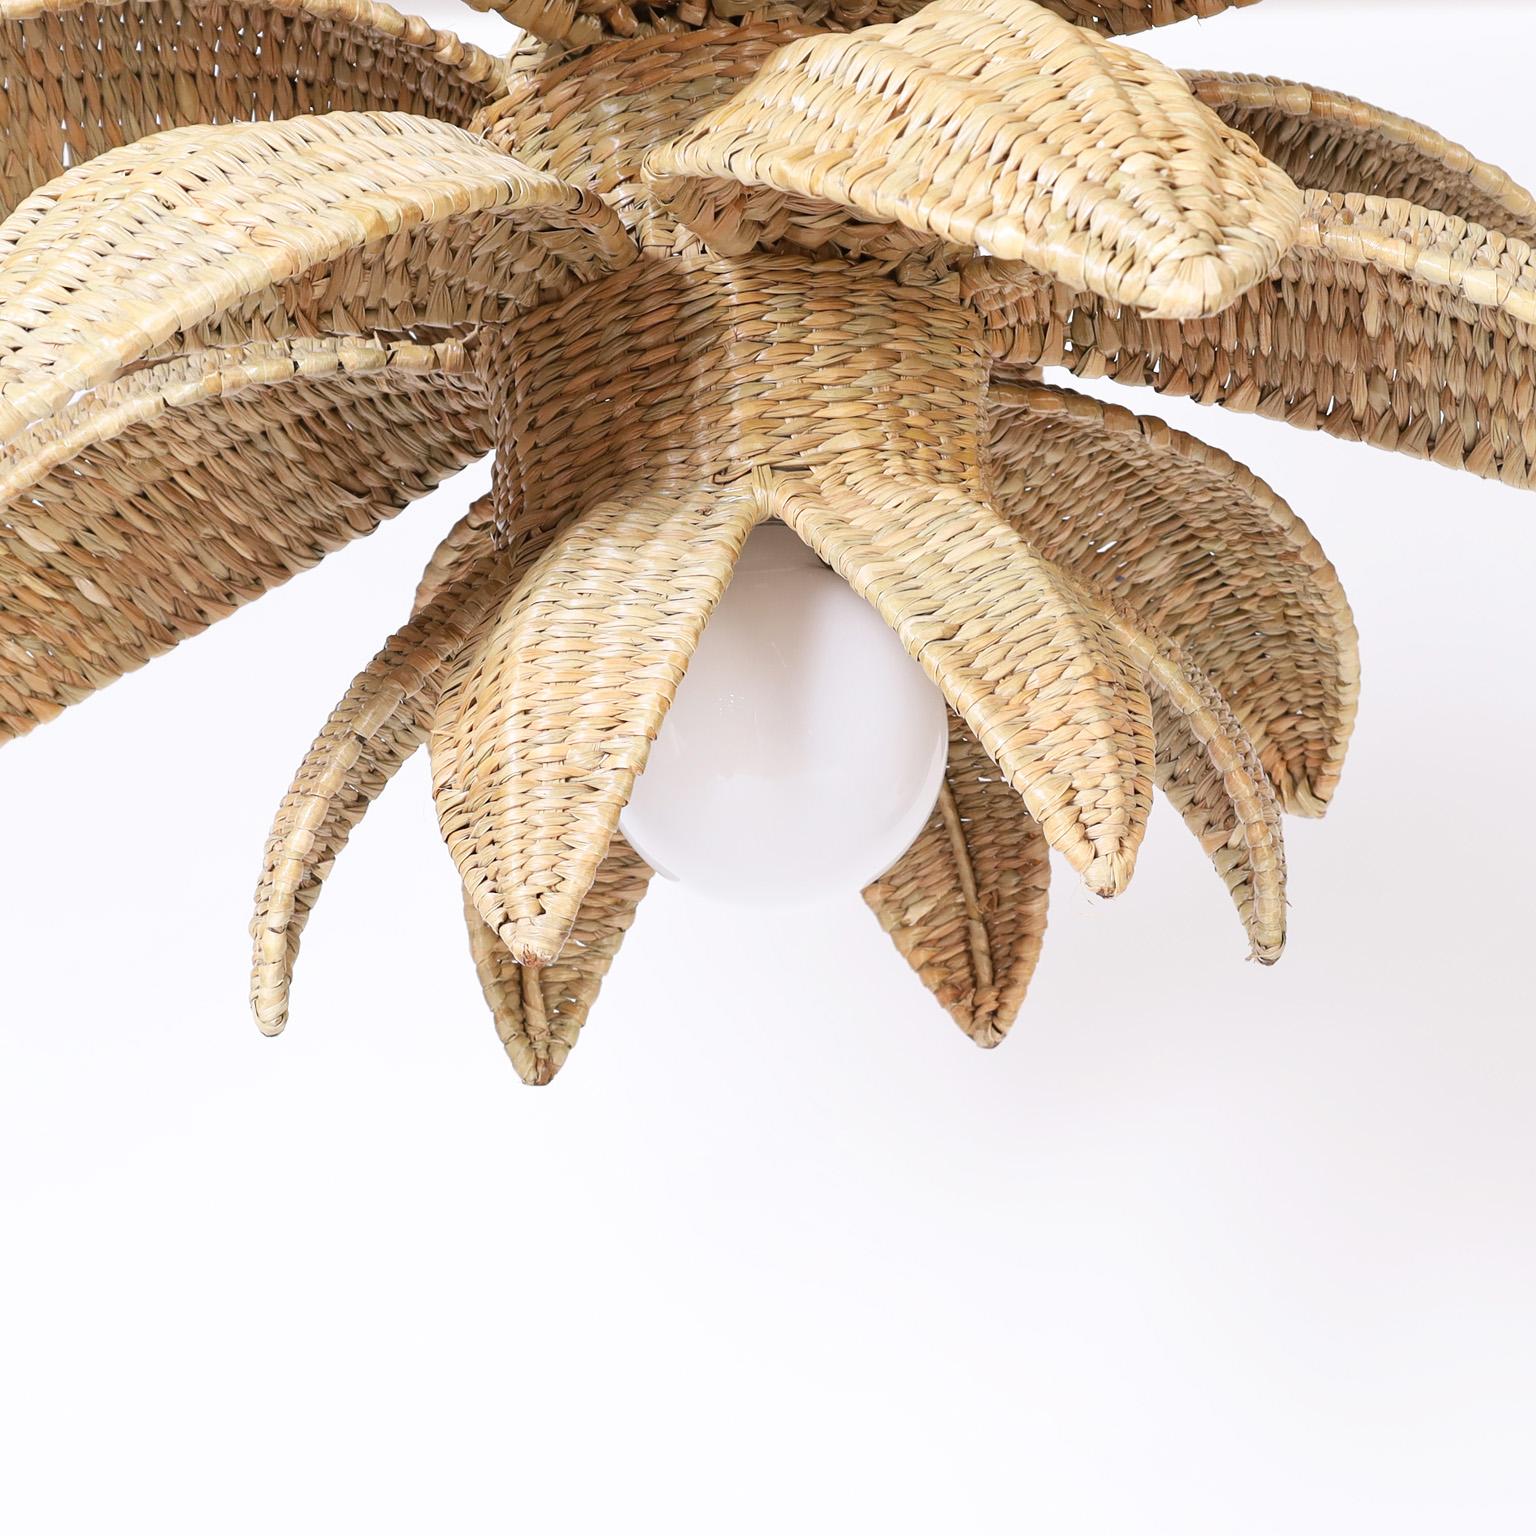 Hand-Woven Sanibel Wicker Palm Leaf or Lotus Pendant from the FS Flores Collection